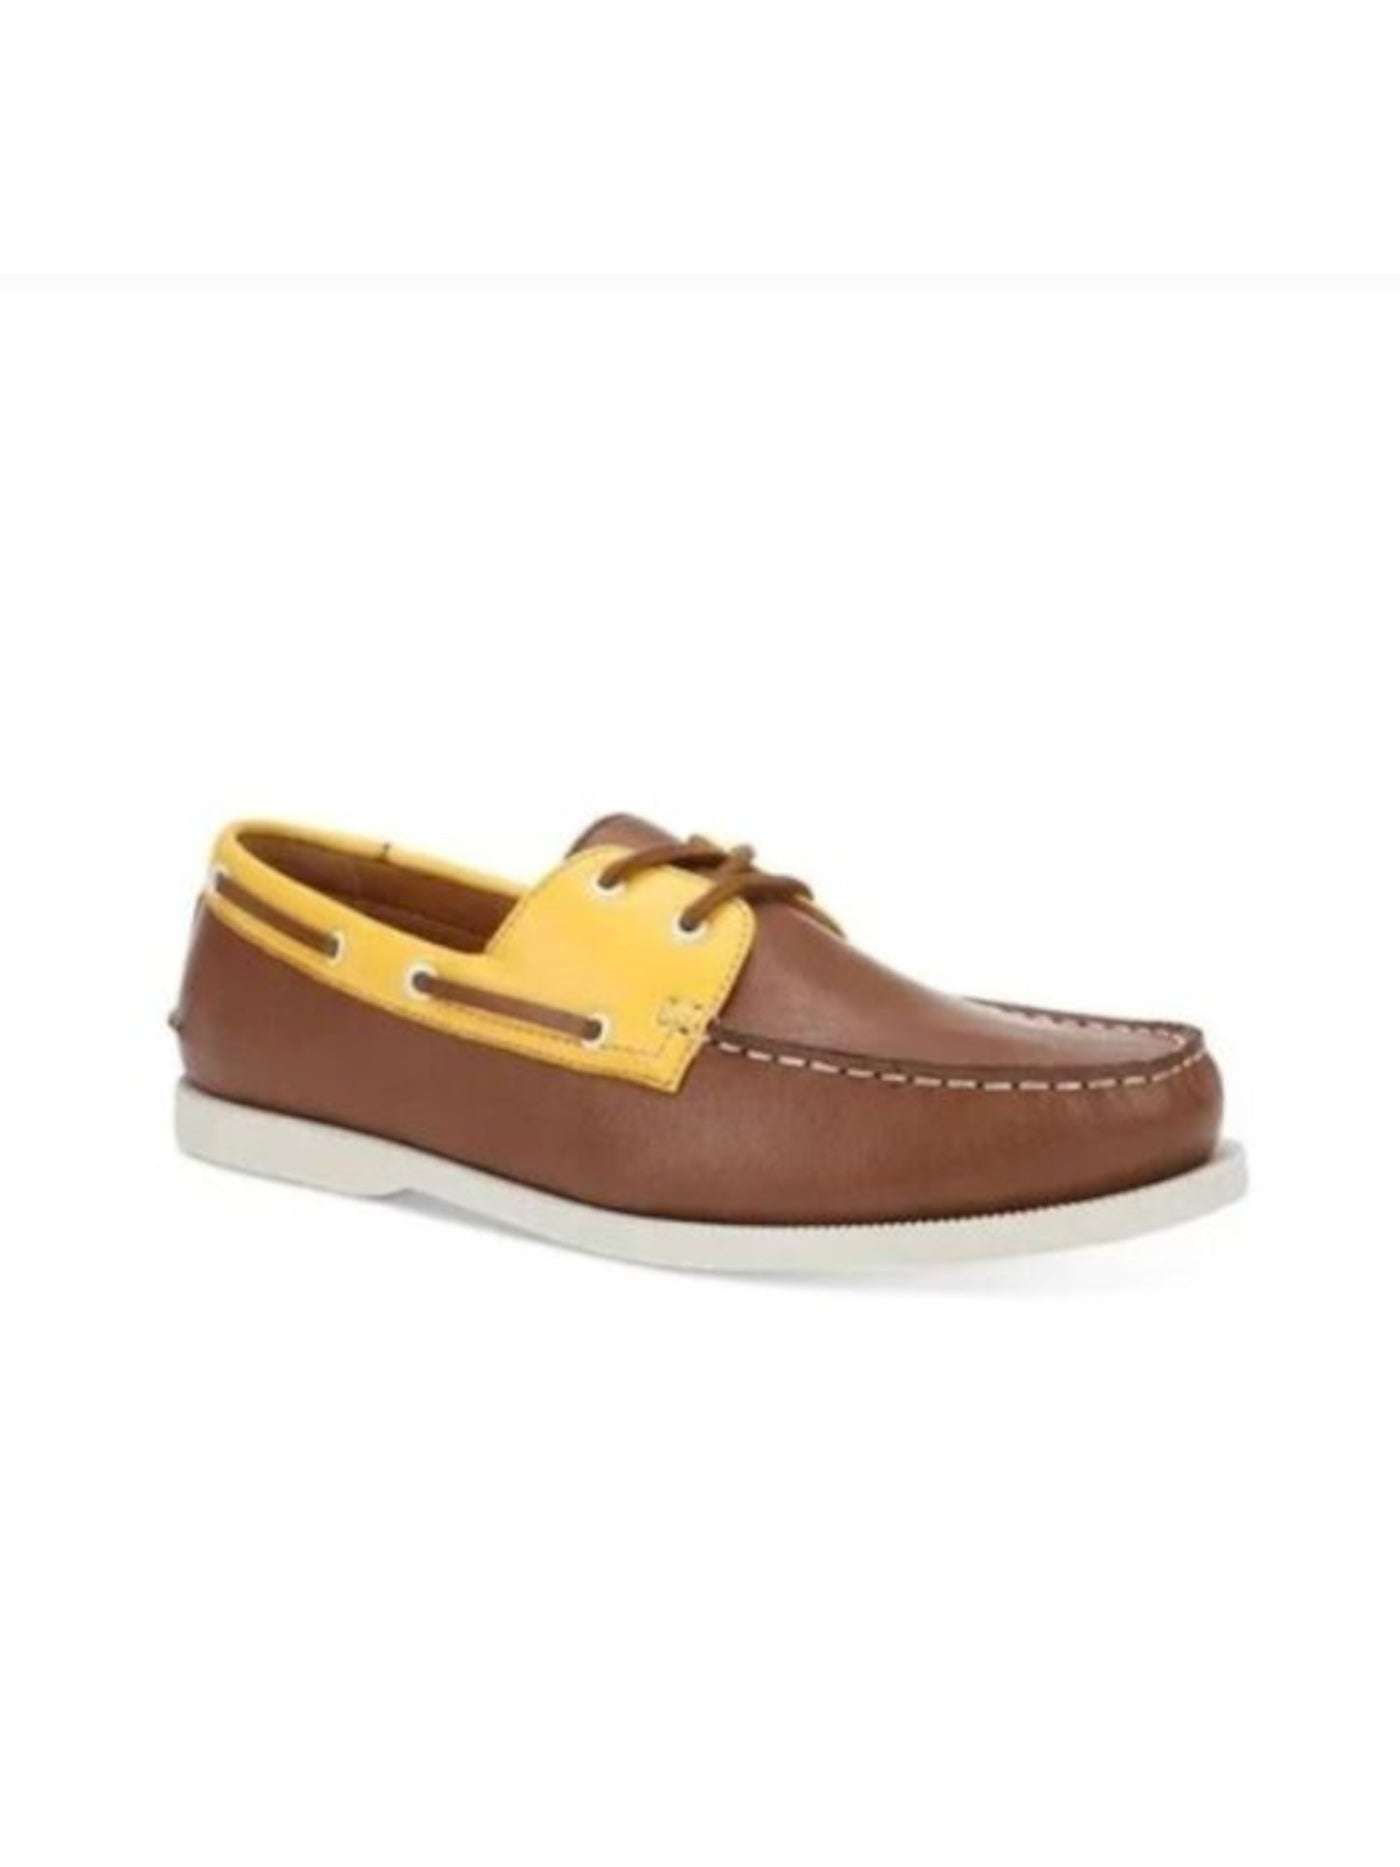 CLUBROOM Mens Brown Color Block Cushioned Comfort Elliot Round Toe Lace-Up Boat Shoes 11.5 M